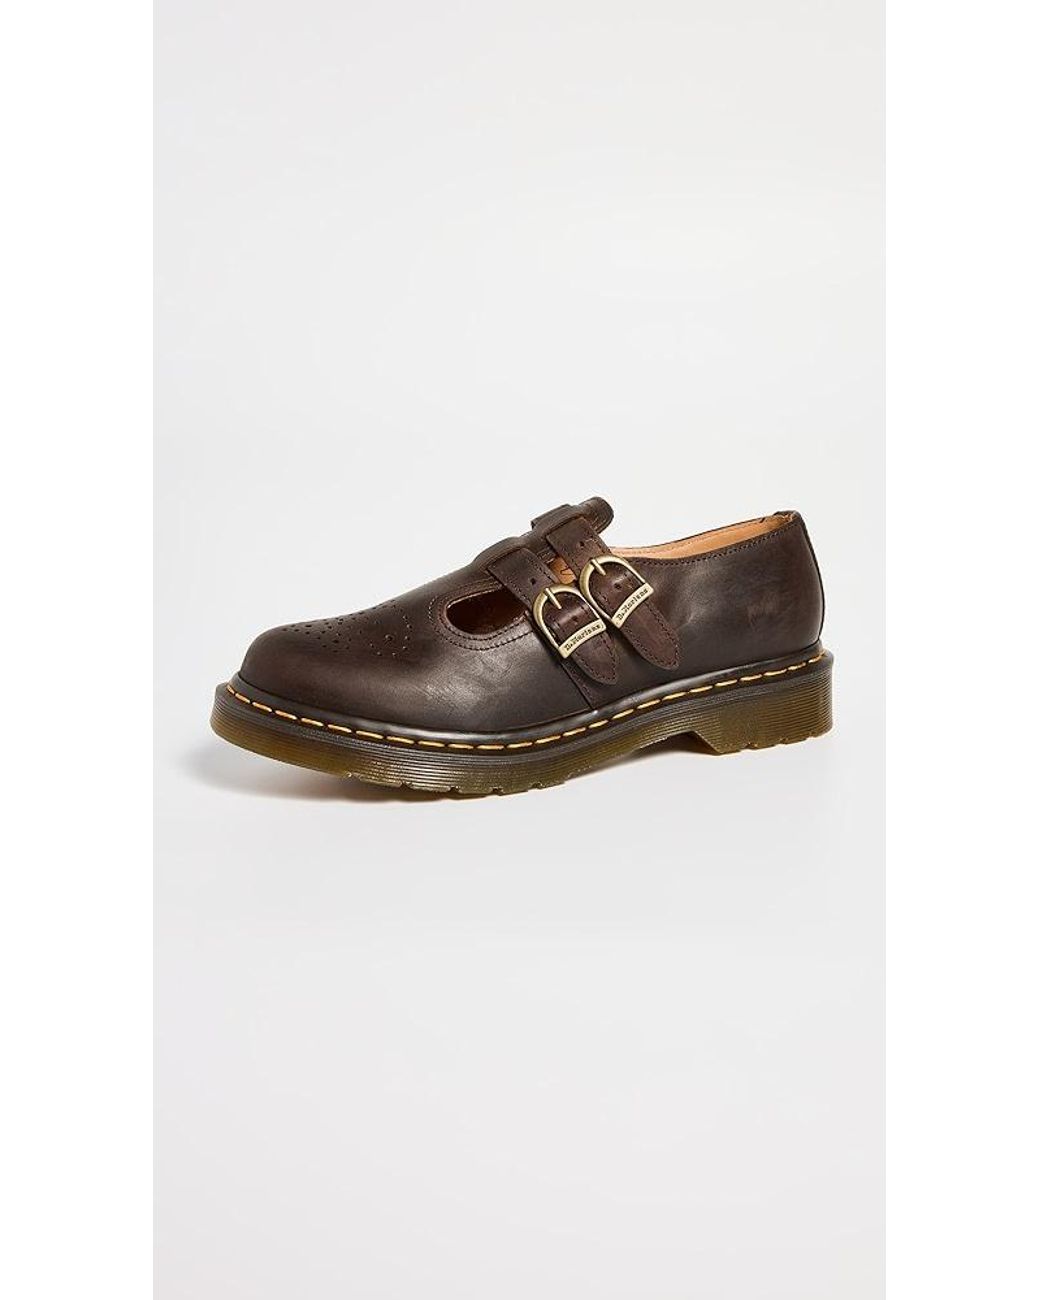 Dr. Martens 8065 Mary Janes in Brown | Lyst